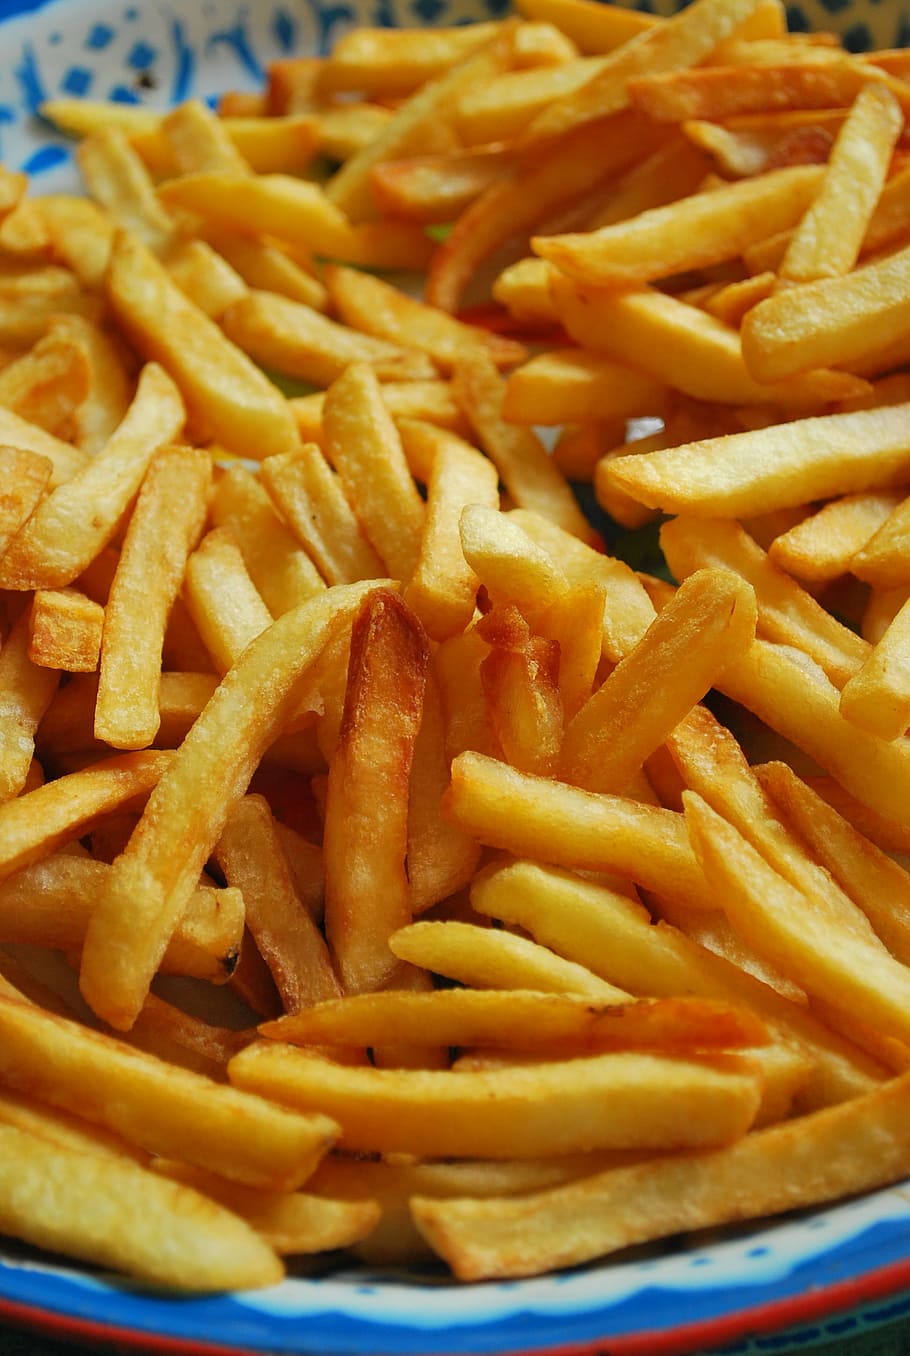 french fries lot, fried, food, fry, foodstuff, delicious, deep fried foods, junk food, fast food, bread